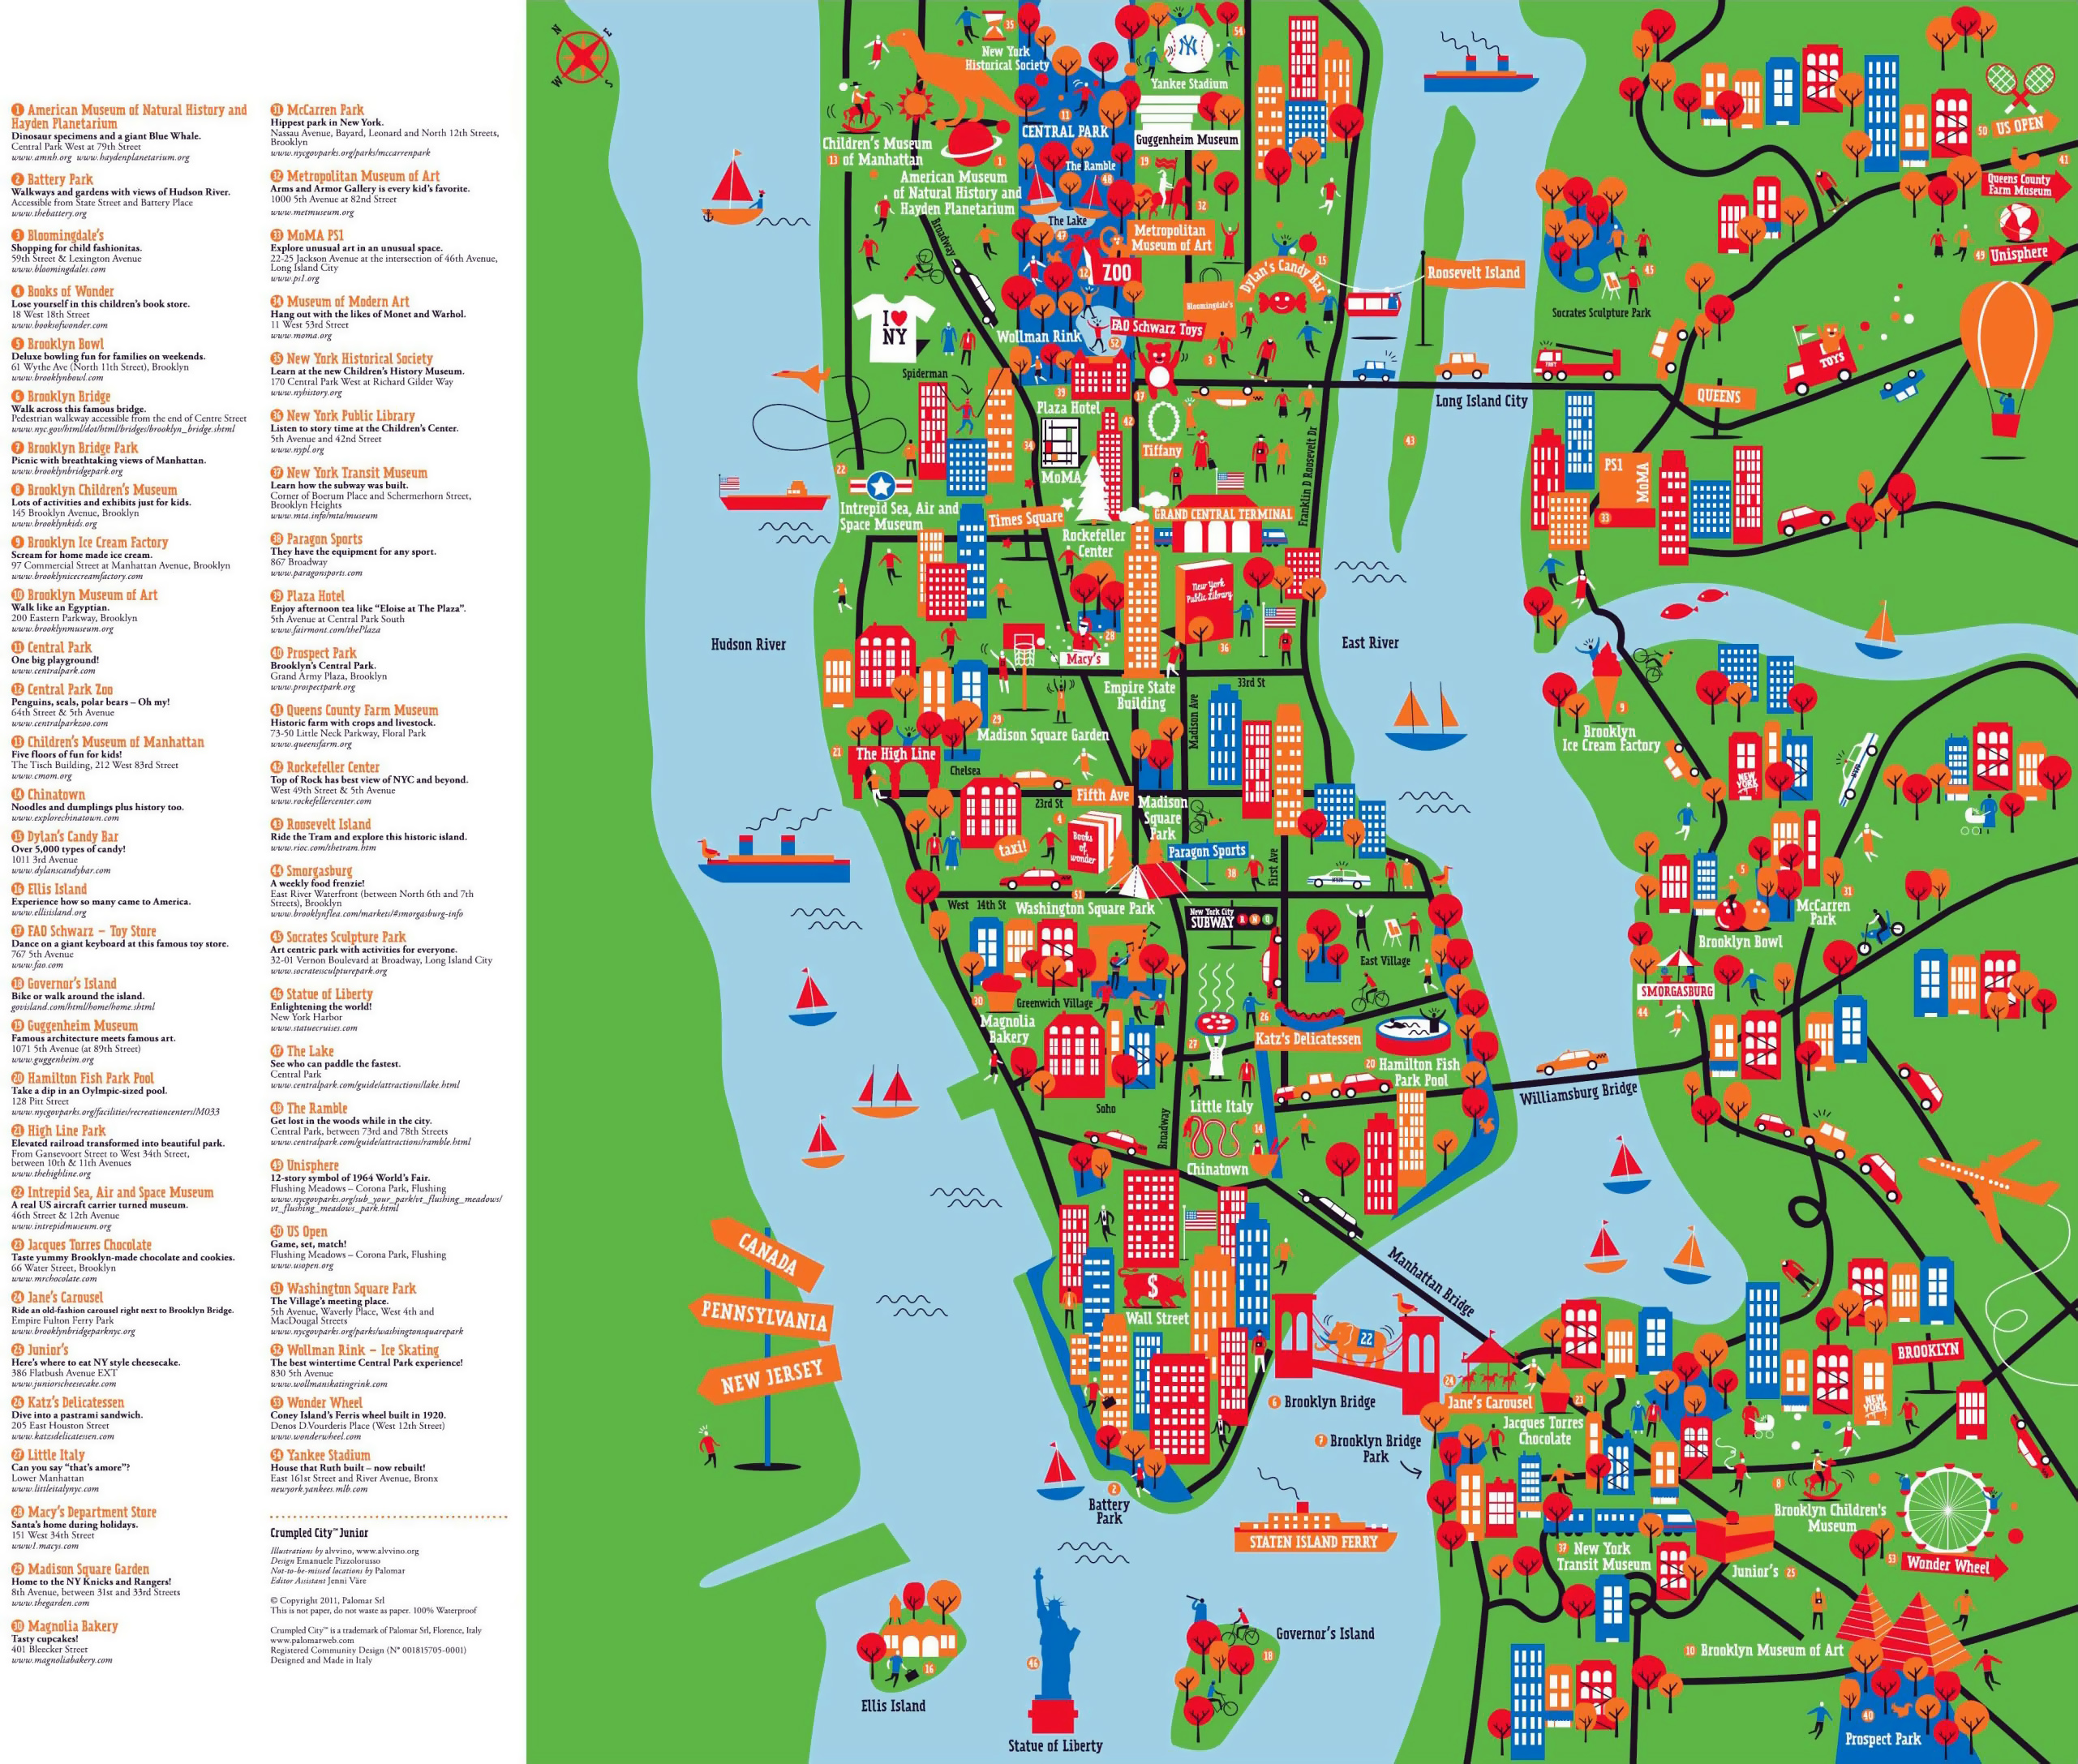 large-detailed-new-york-tourist-attractions-map-new-york-city-large-detailed-tourist